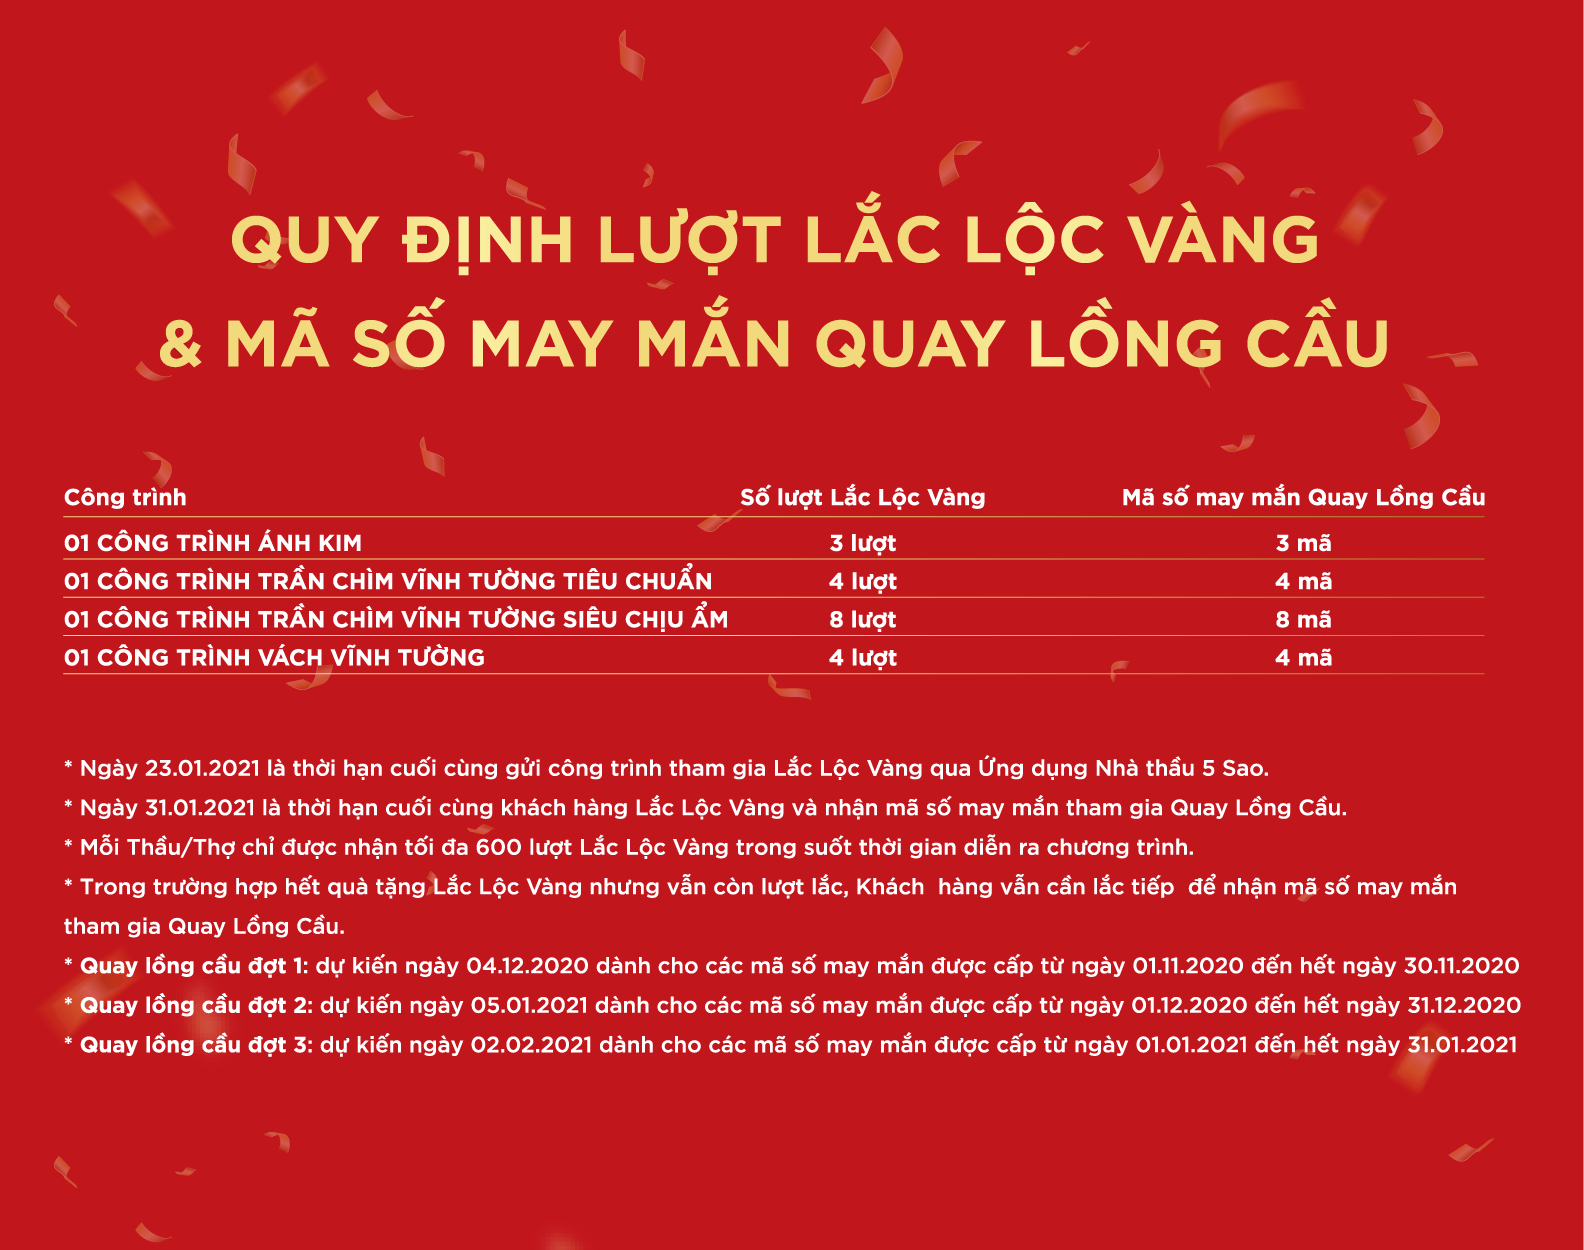 Quy dinh Lac loc vang